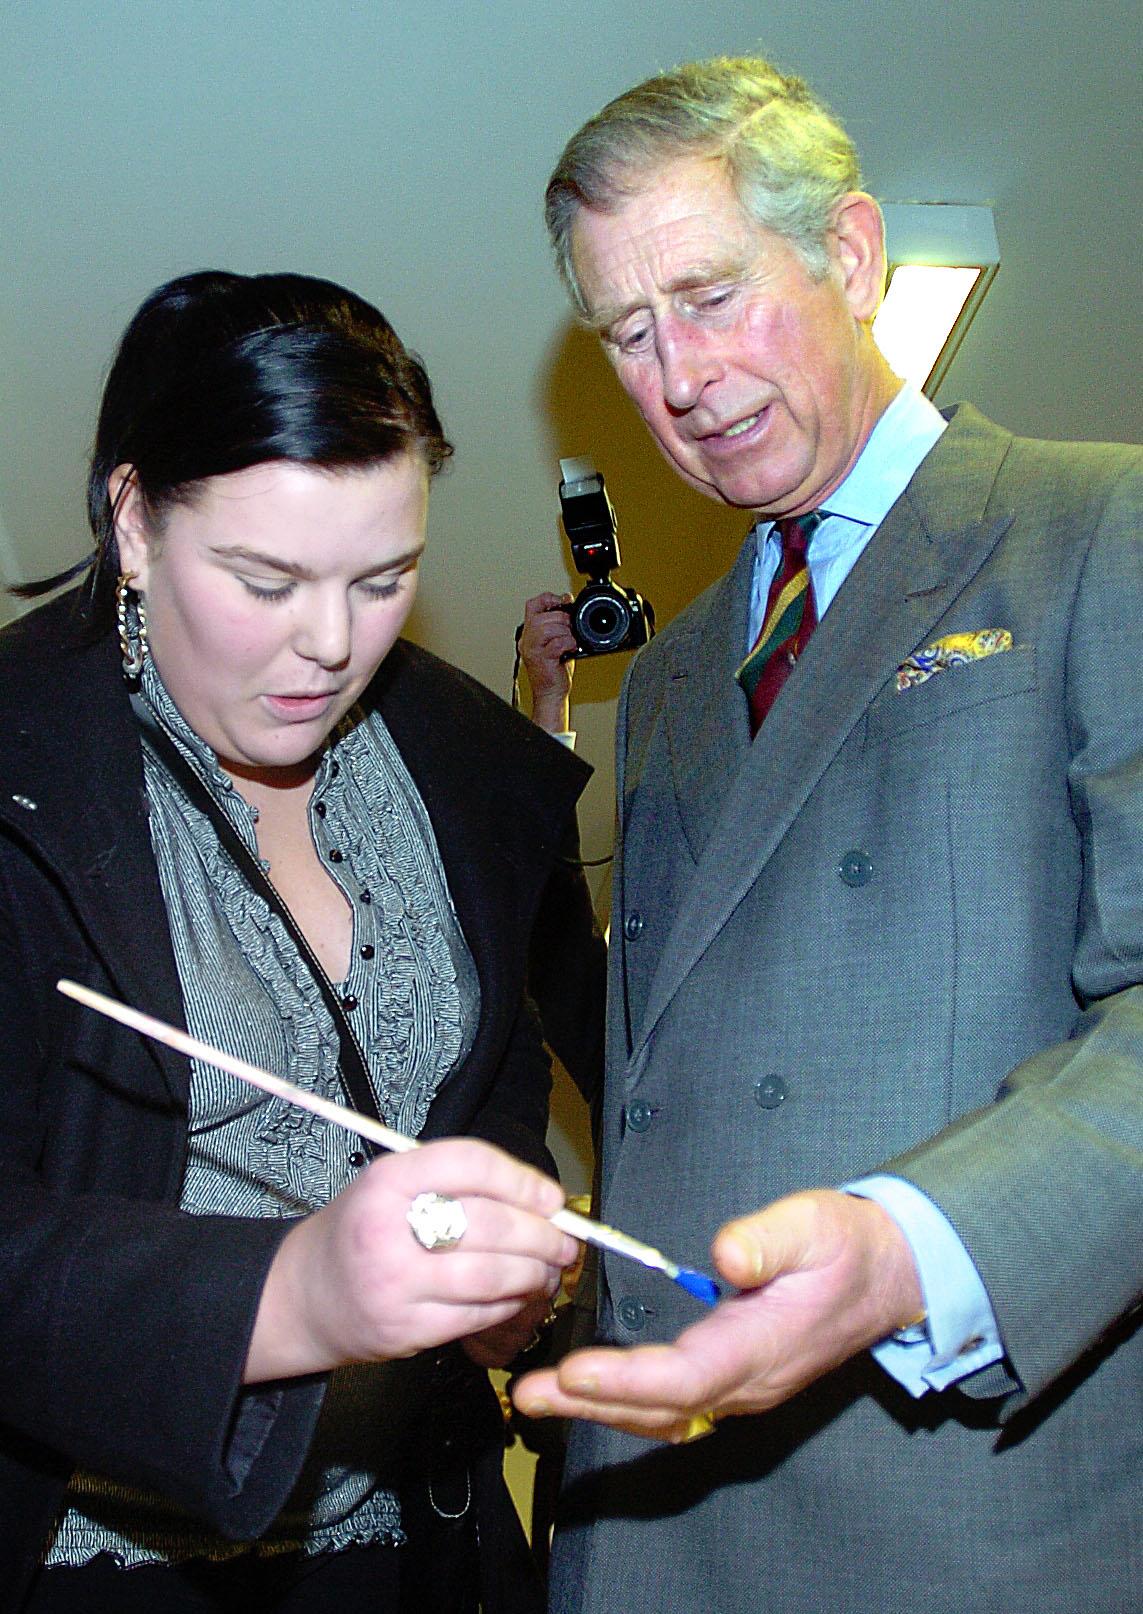 Samantha Burns paints the Prince's hand blue so he can do a hand print for the Cornerstone Centre wall